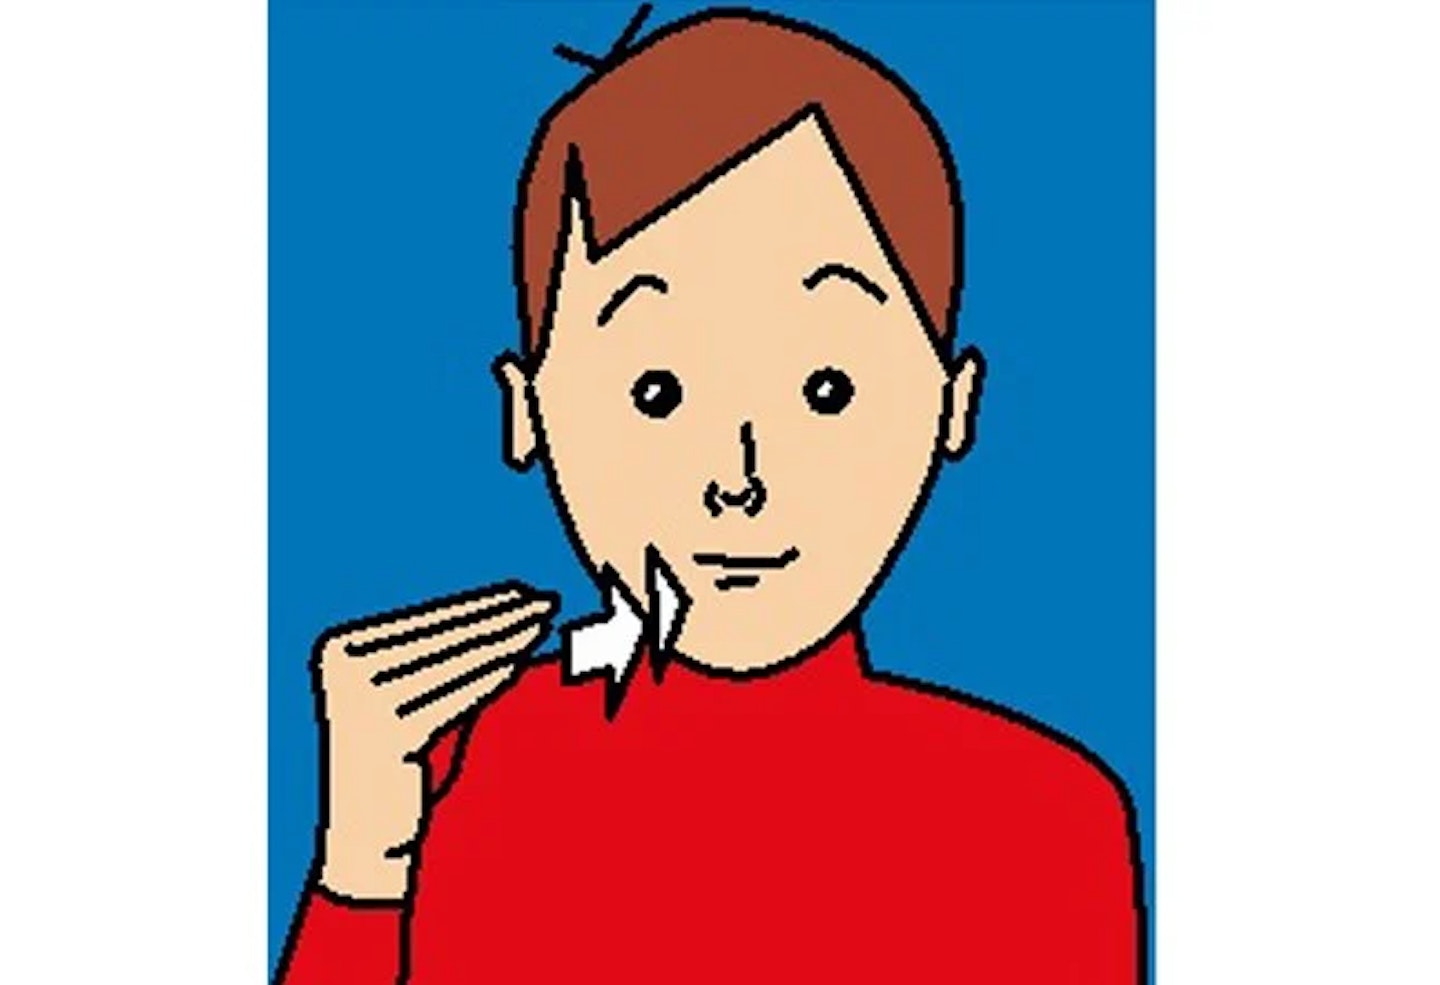 Animated person making eat sign